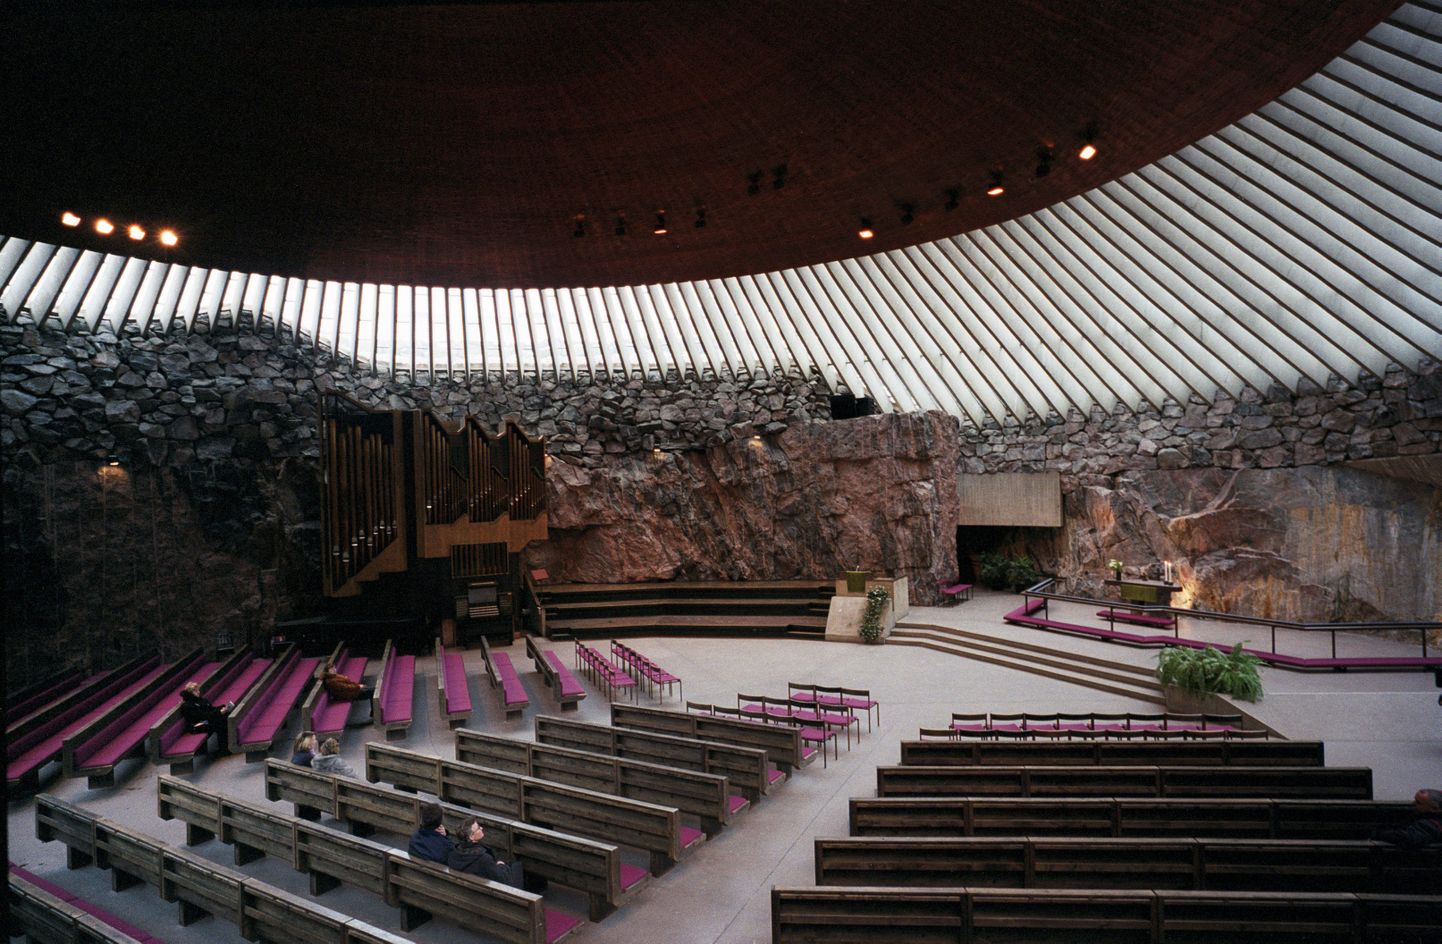 HELSINKI 20000201 
Interior of Temppeliaukio Church in Helsinki, Finland.  Designed by the architect brothers, Timo and Tuomo Suomalainen. The Church was built in 1968-1969. 
The church is built into solid rock, therefore, it is also known as the Church of the Rock. The acoustics are excellent and the church is often used for concerts.
Photo: Rolf Adlercreutz / SCANPIX  code 4349